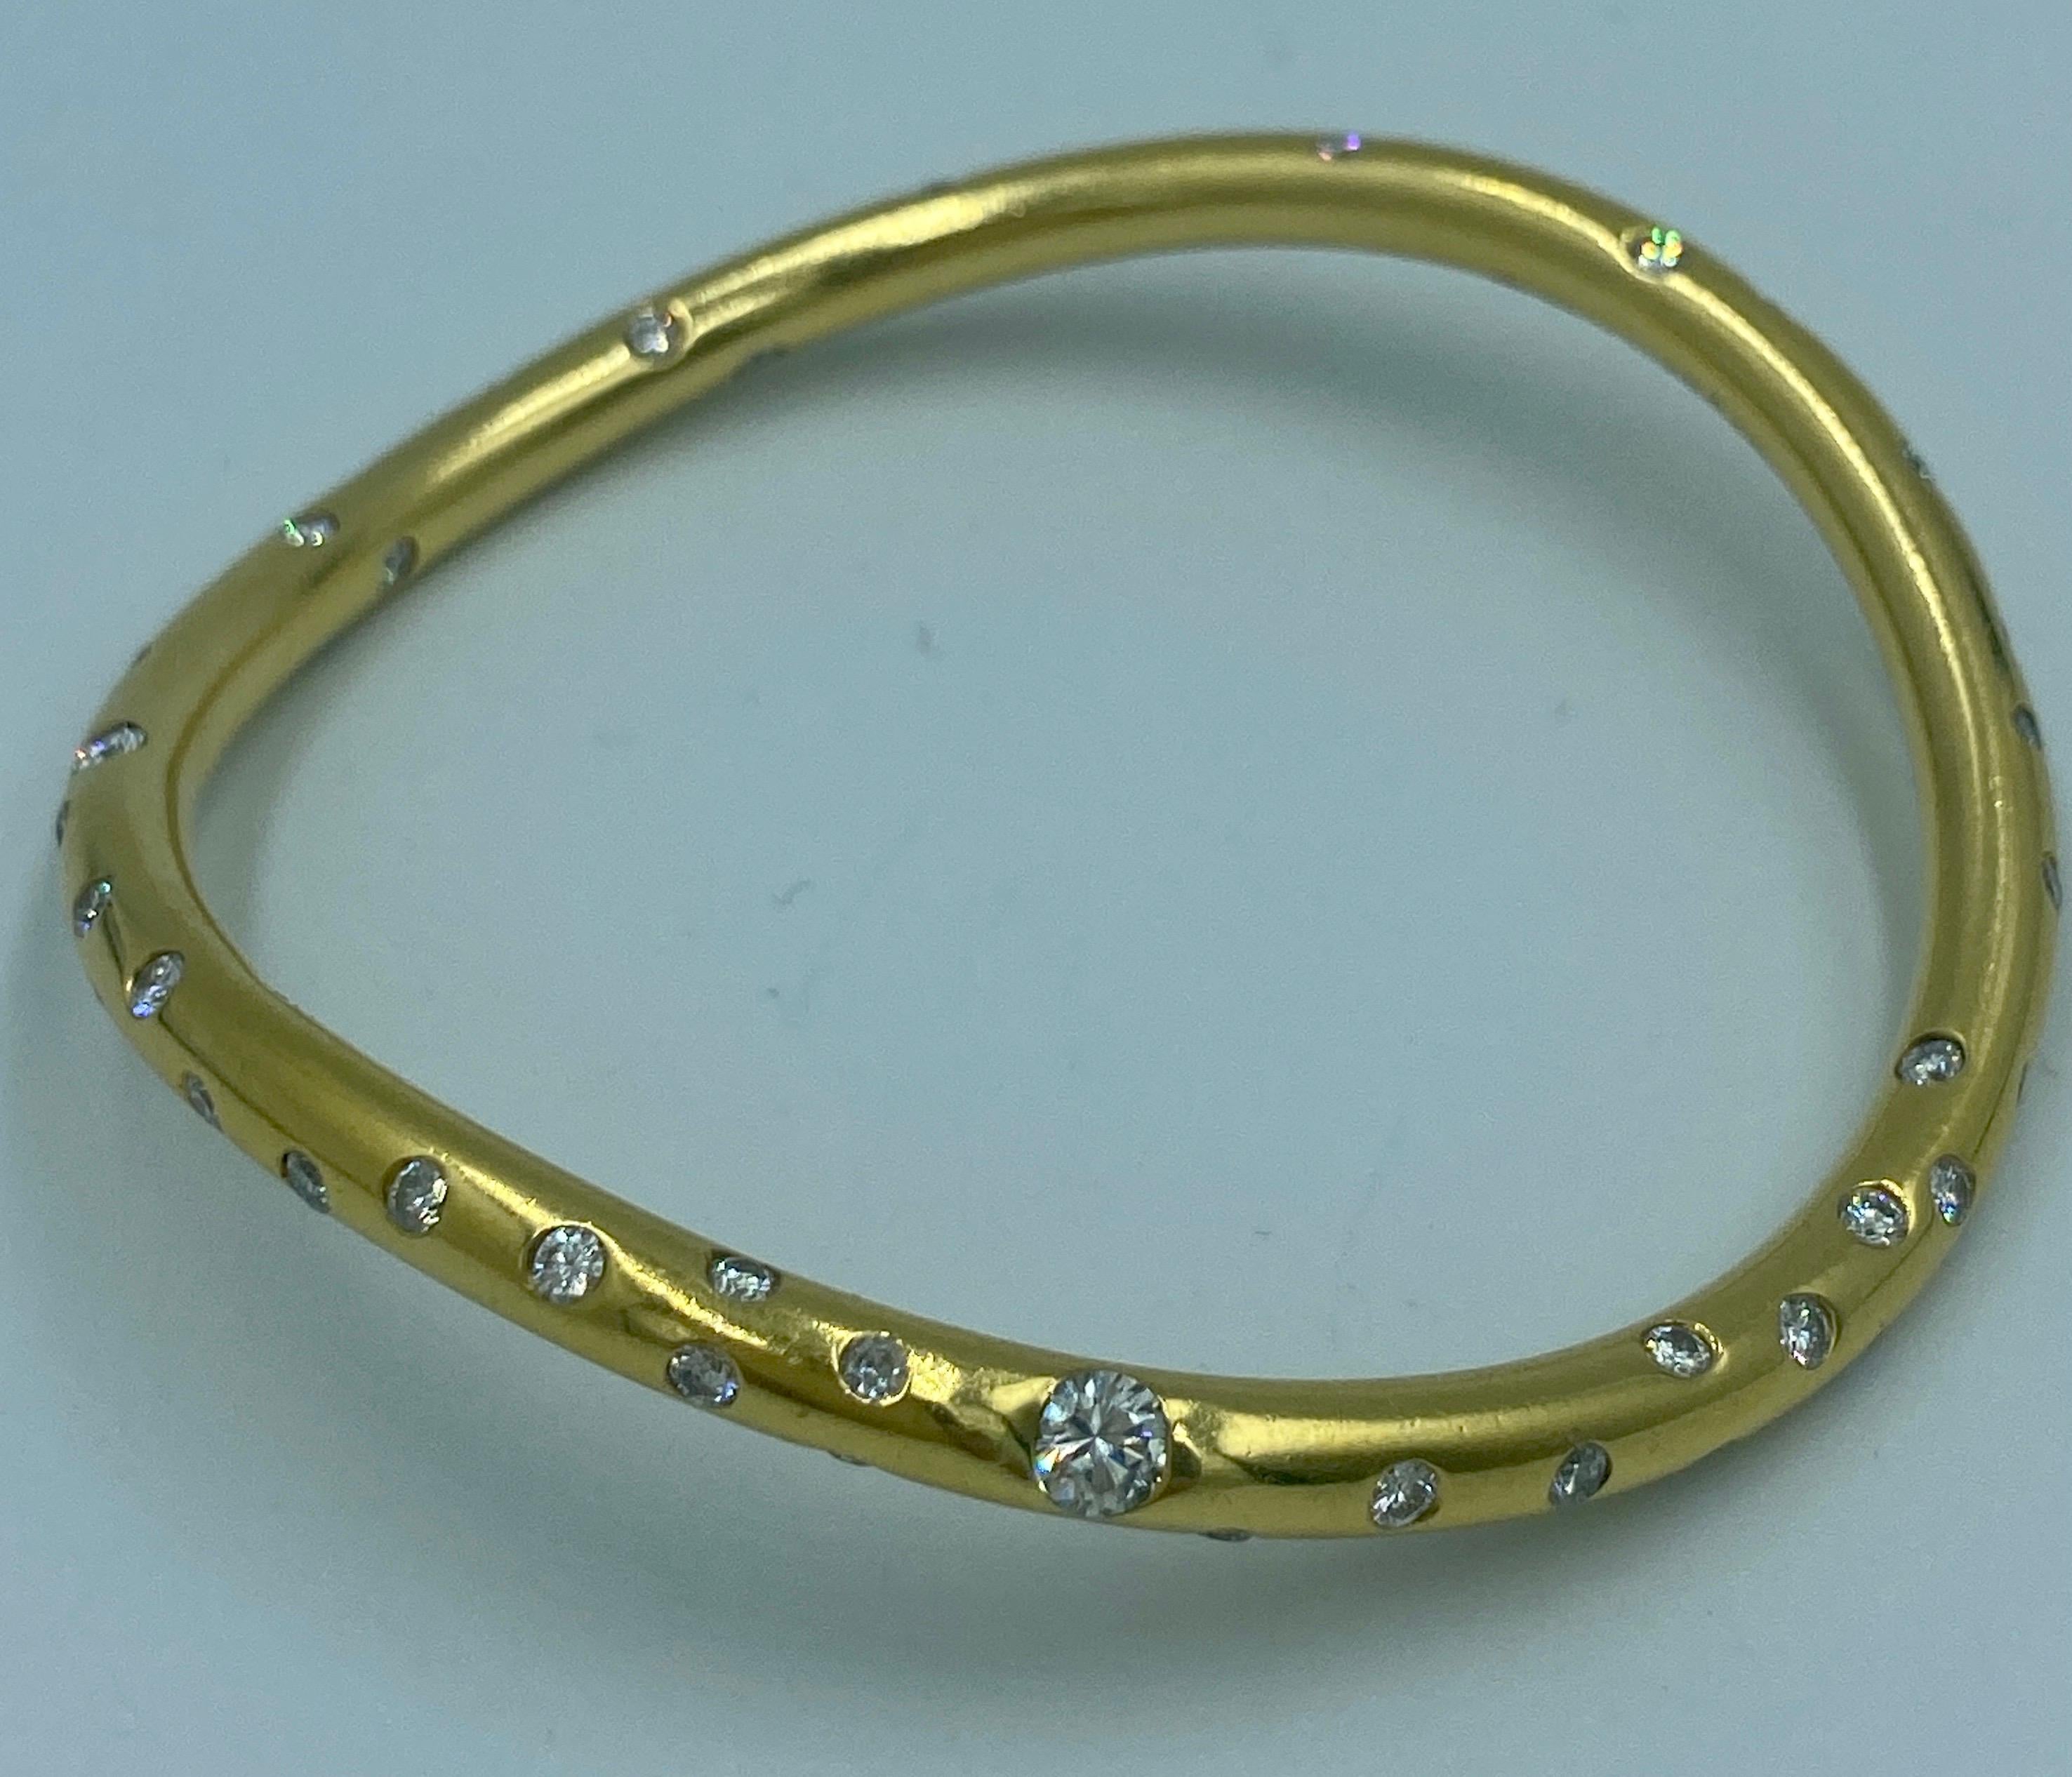 This 18 k gold Niessing bangle is studded with varying sizes of round cut diamonds. It is a hefty piece at 58 g. Its asymmetric design and the many diamonds make this a most attractive stylish piece of jewellery.